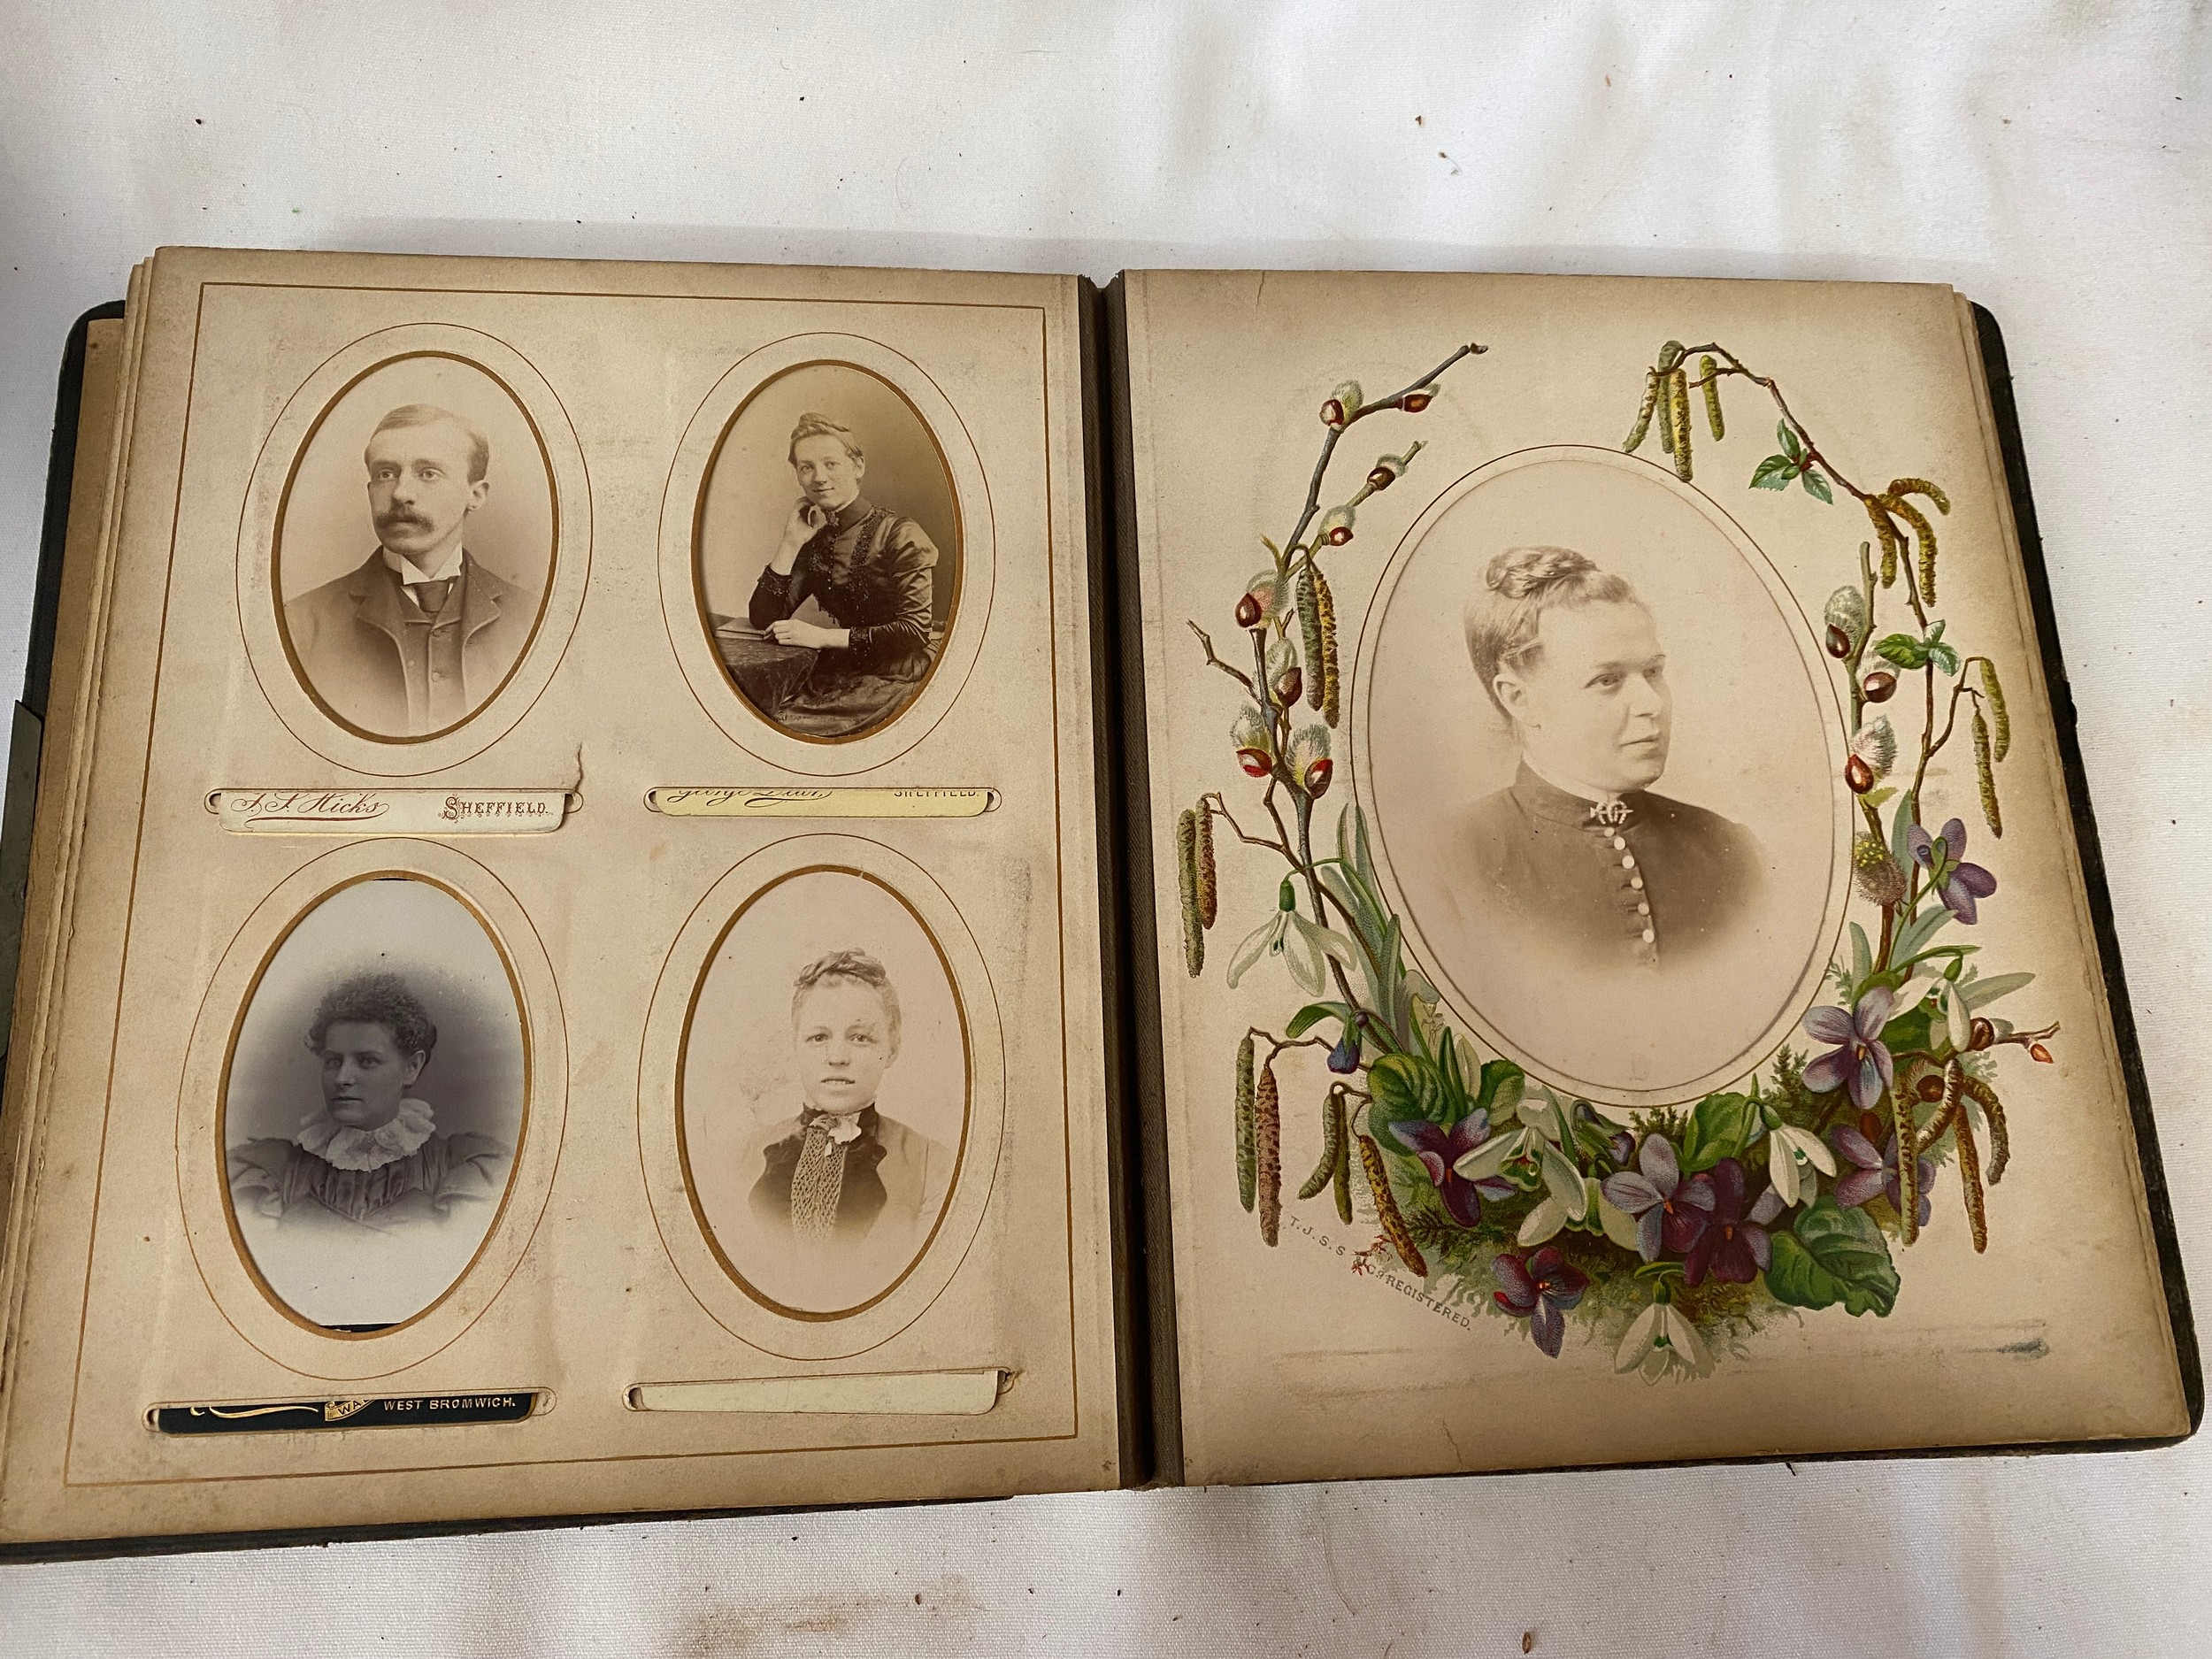 Photograph albums; Saltley College X'mas 1887 presented to Thomas Withers by his fellow students - Image 8 of 30